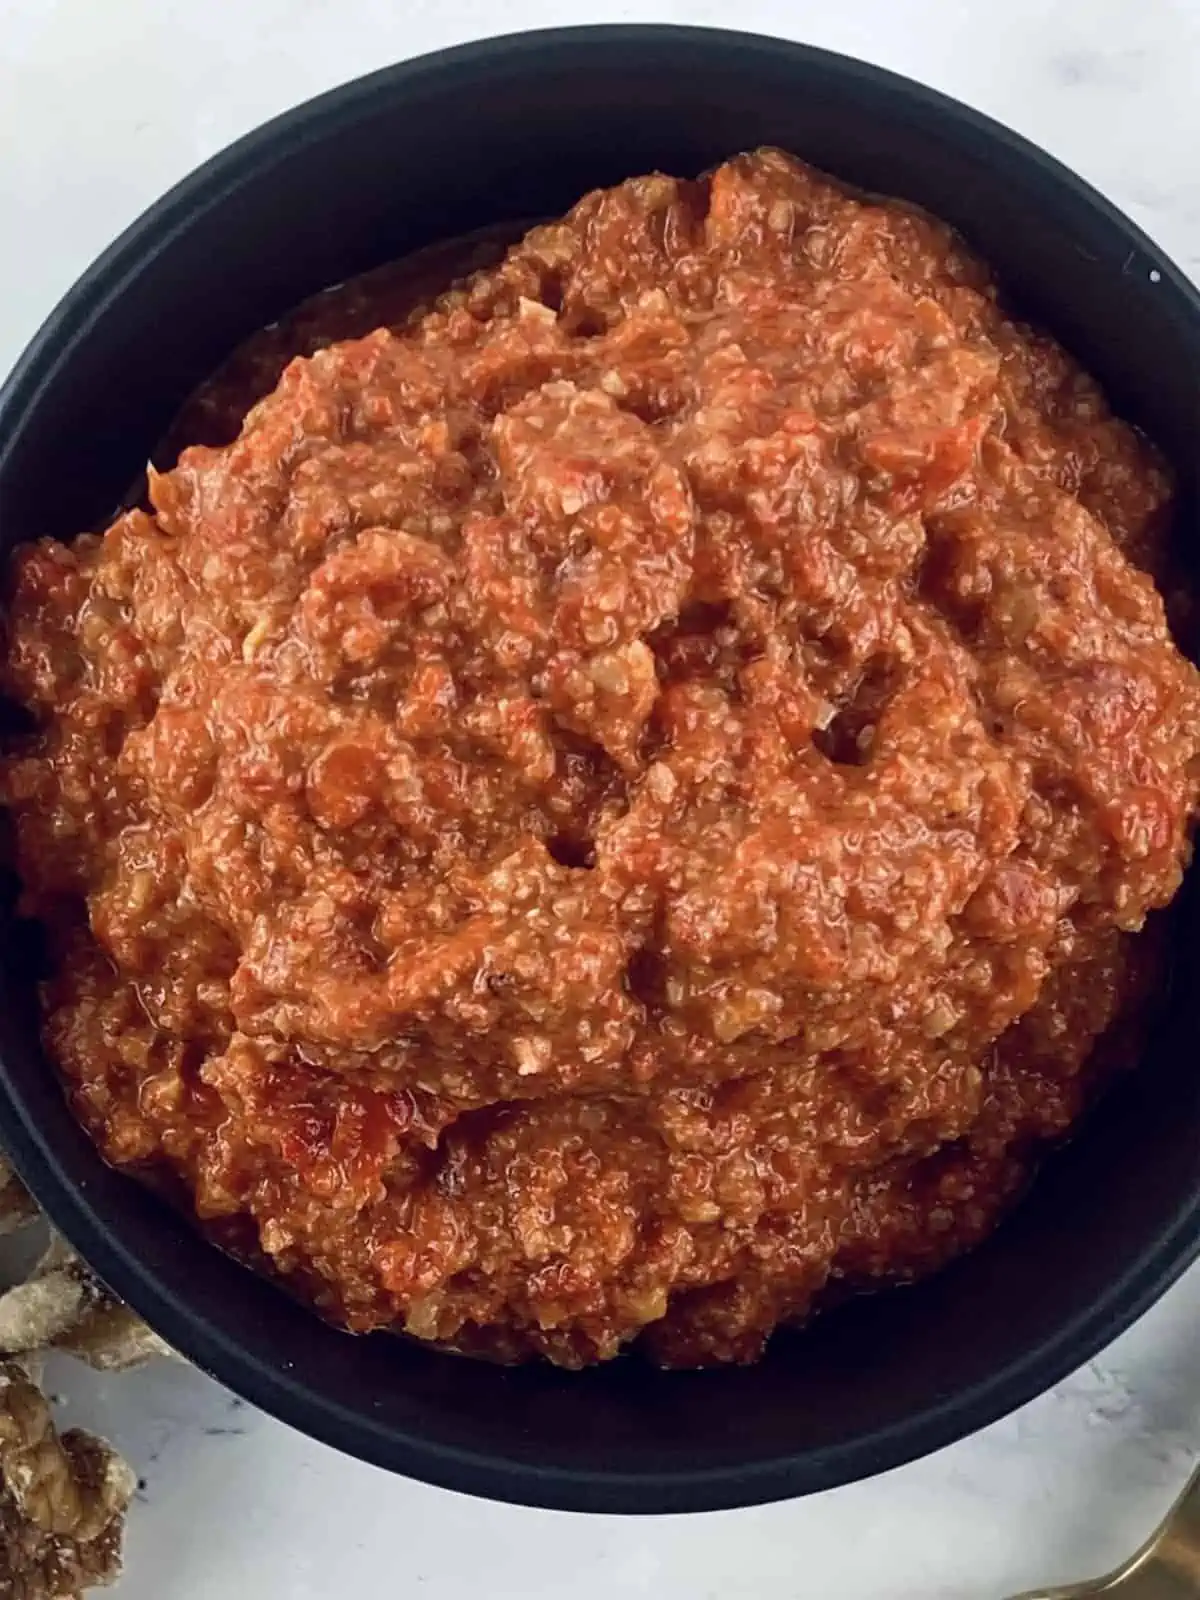 Our Lebanese Muhammara recipe in black bowl with gold spoon and walnuts on the side.